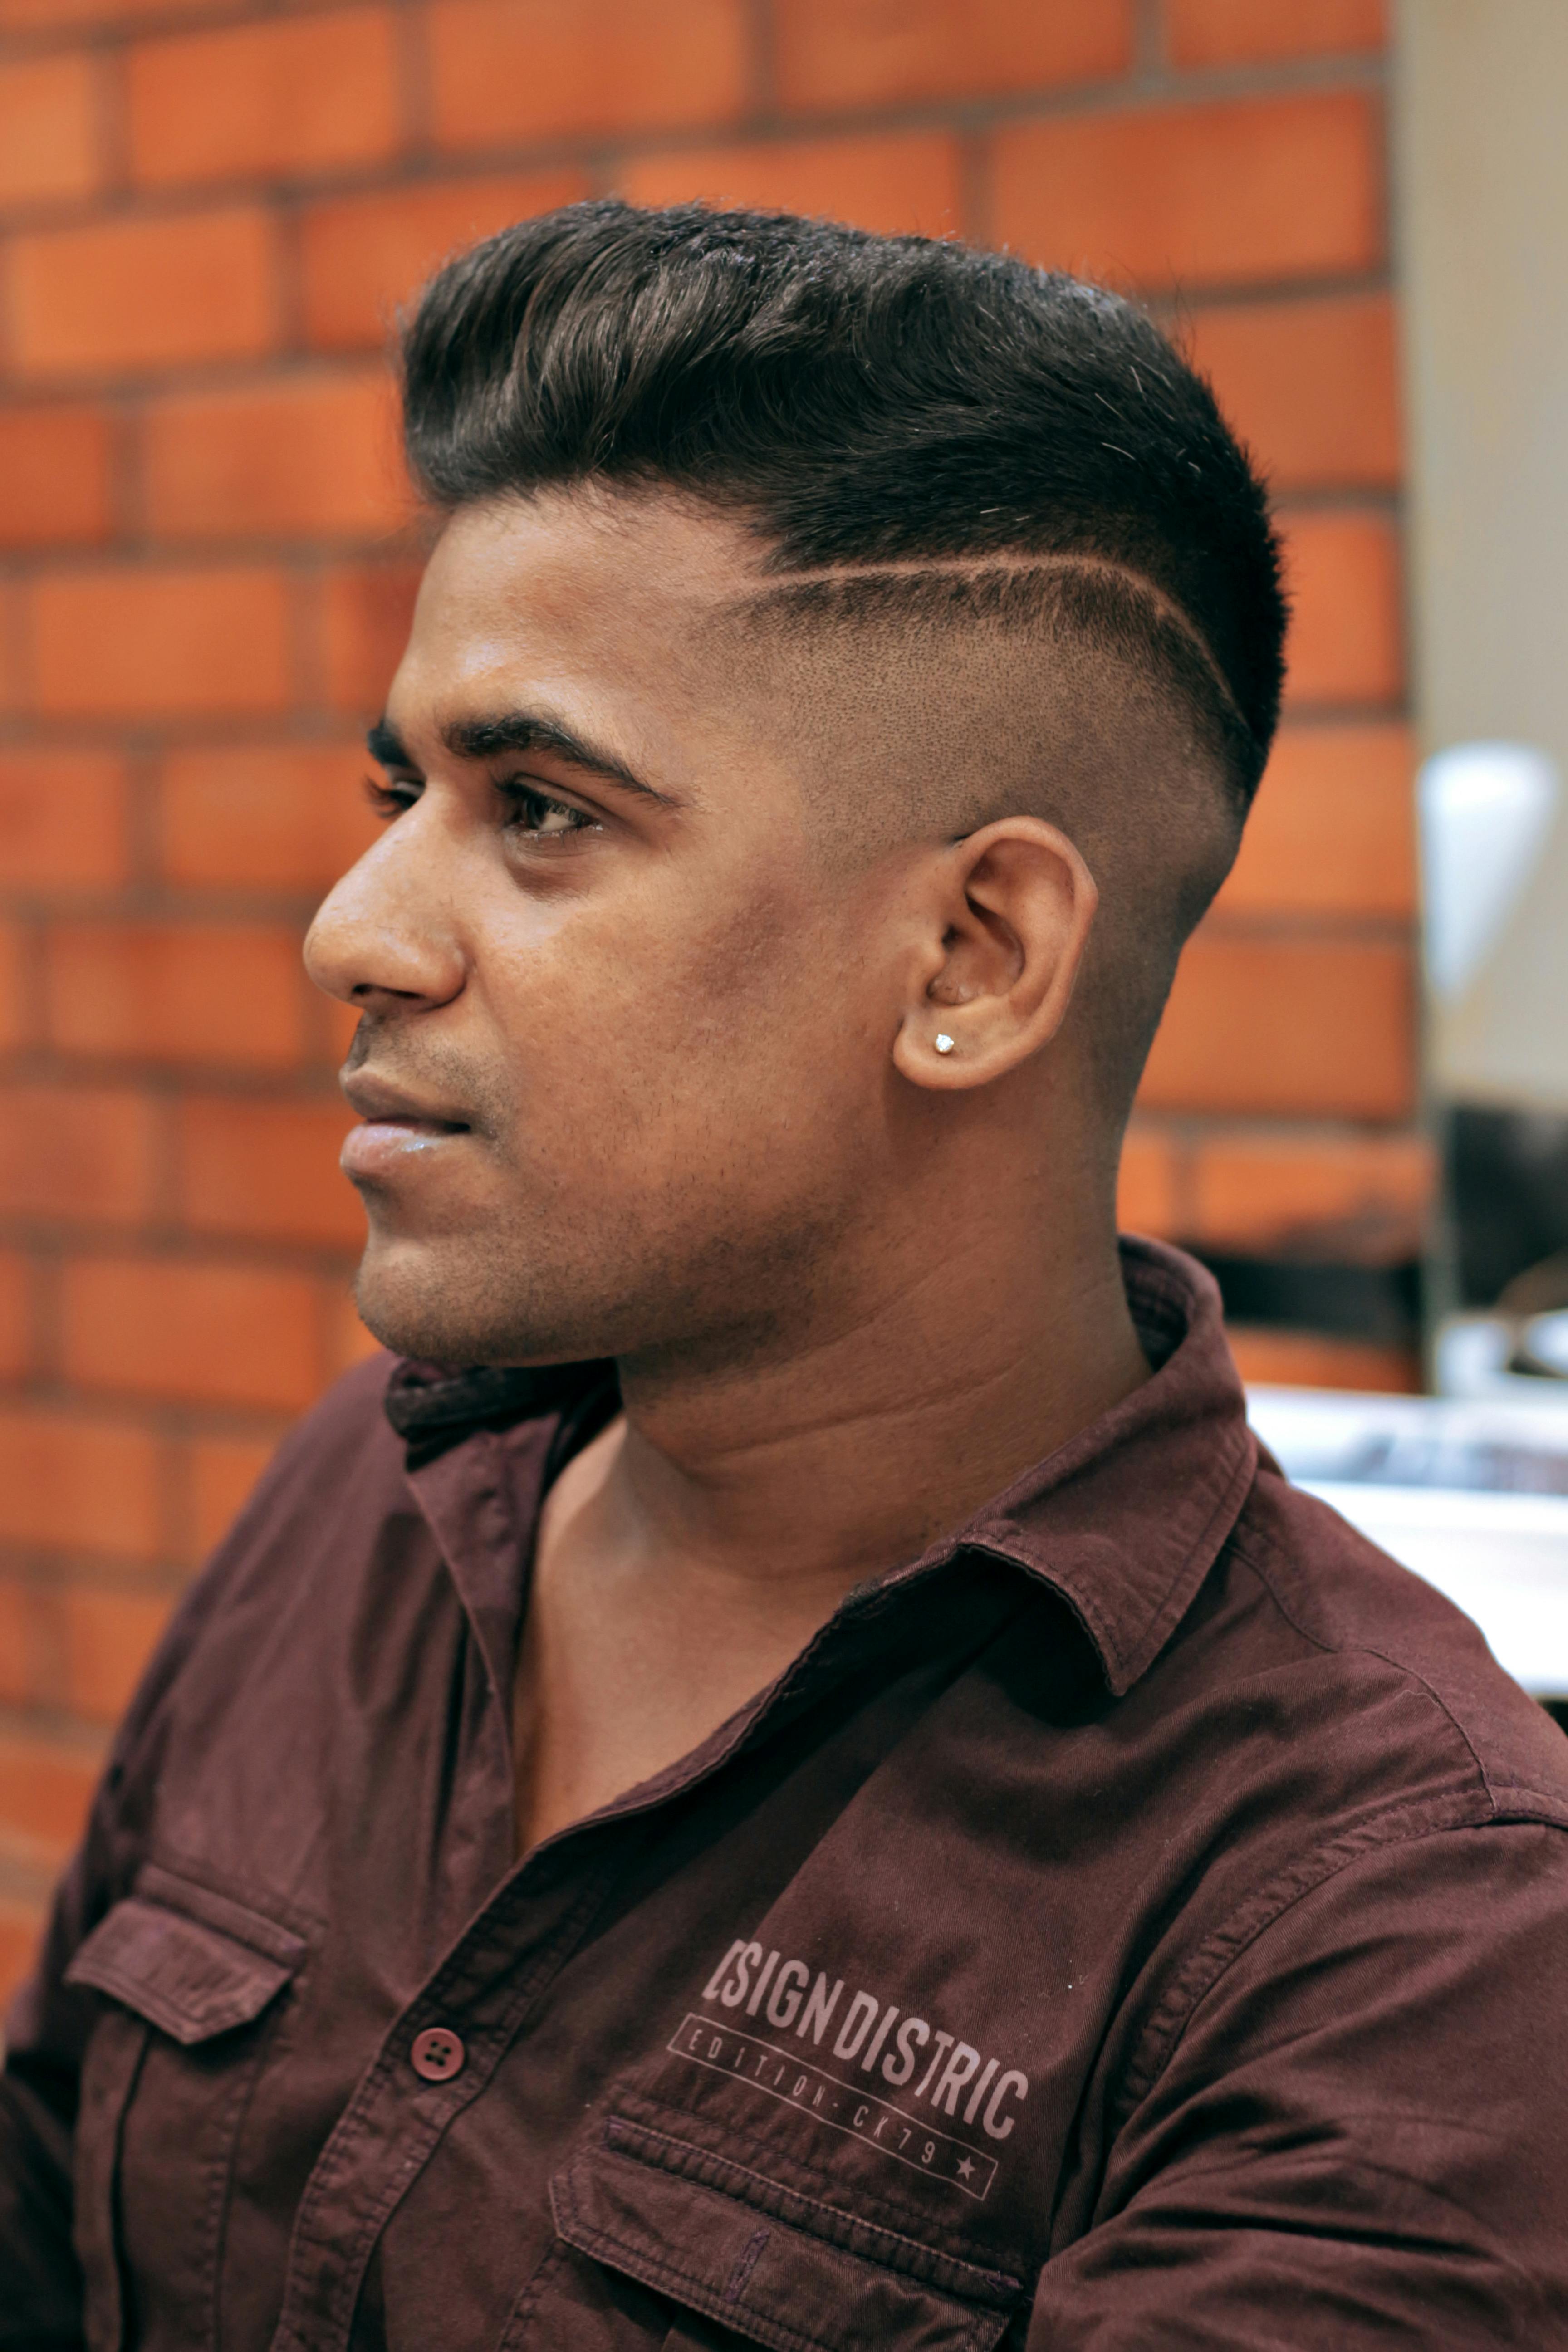 How to choose the best haircut according to your face shape | GQ India